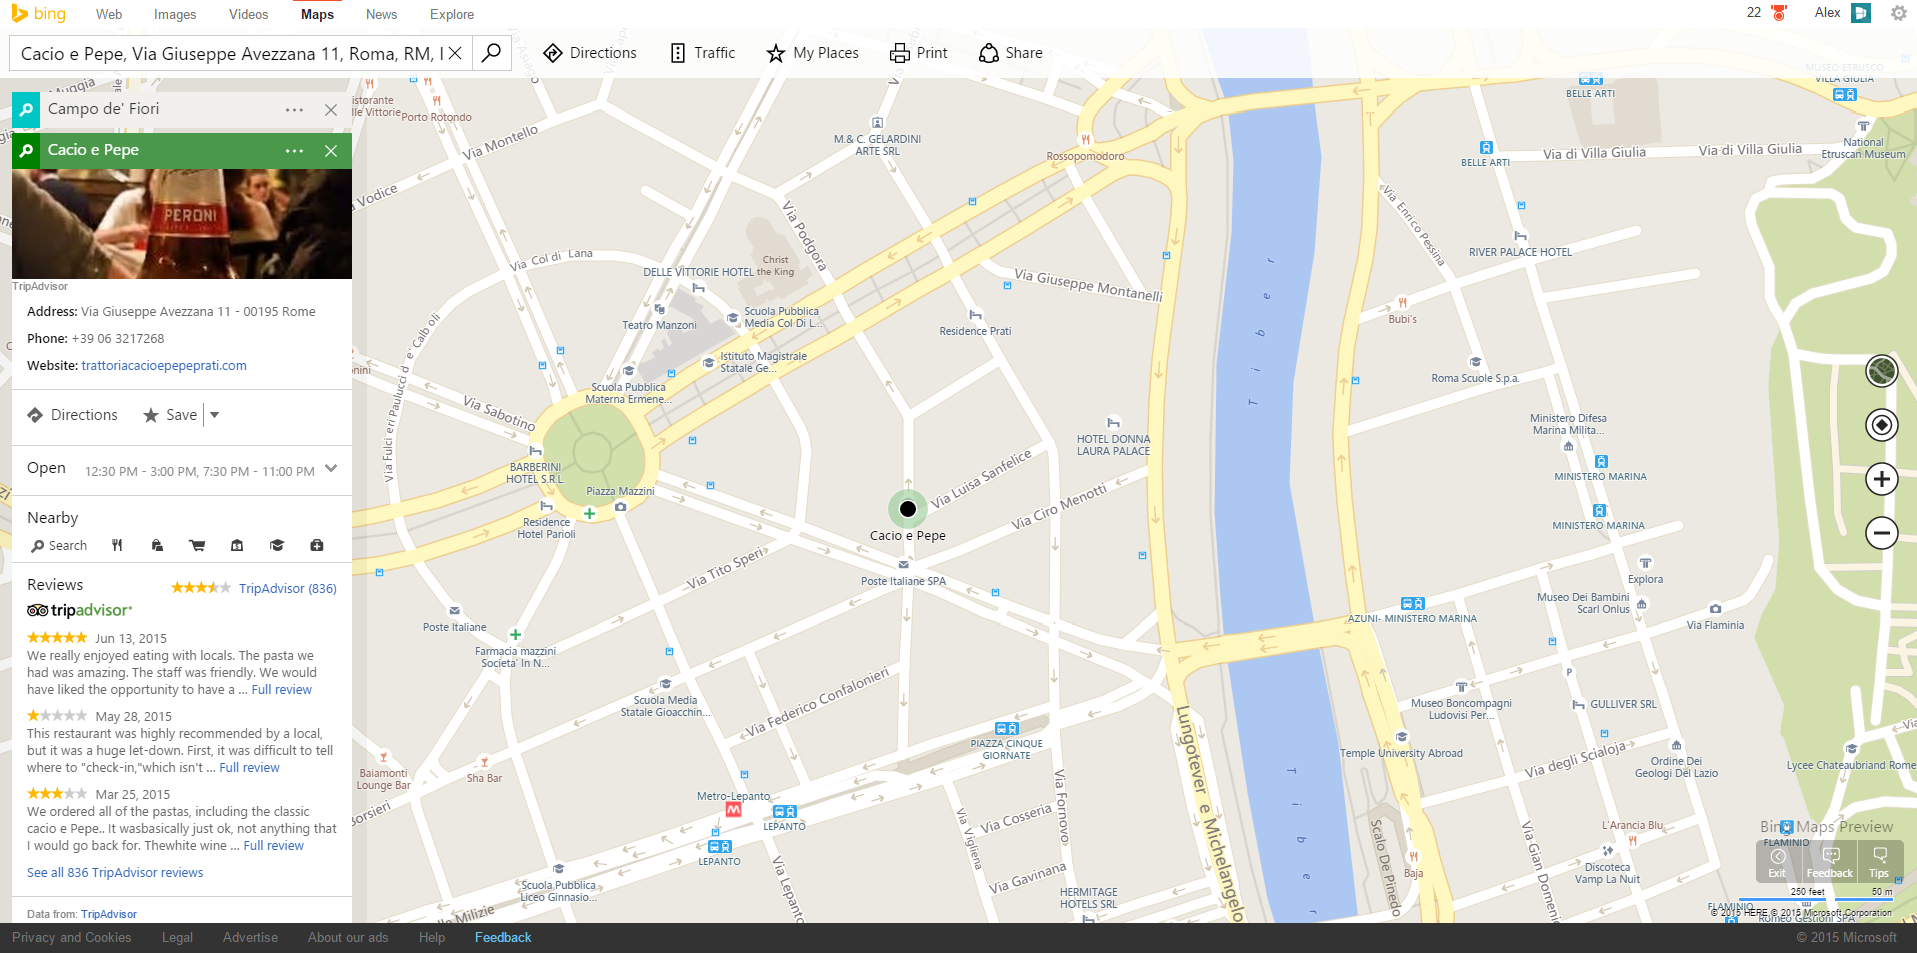 bing_maps_preview_1